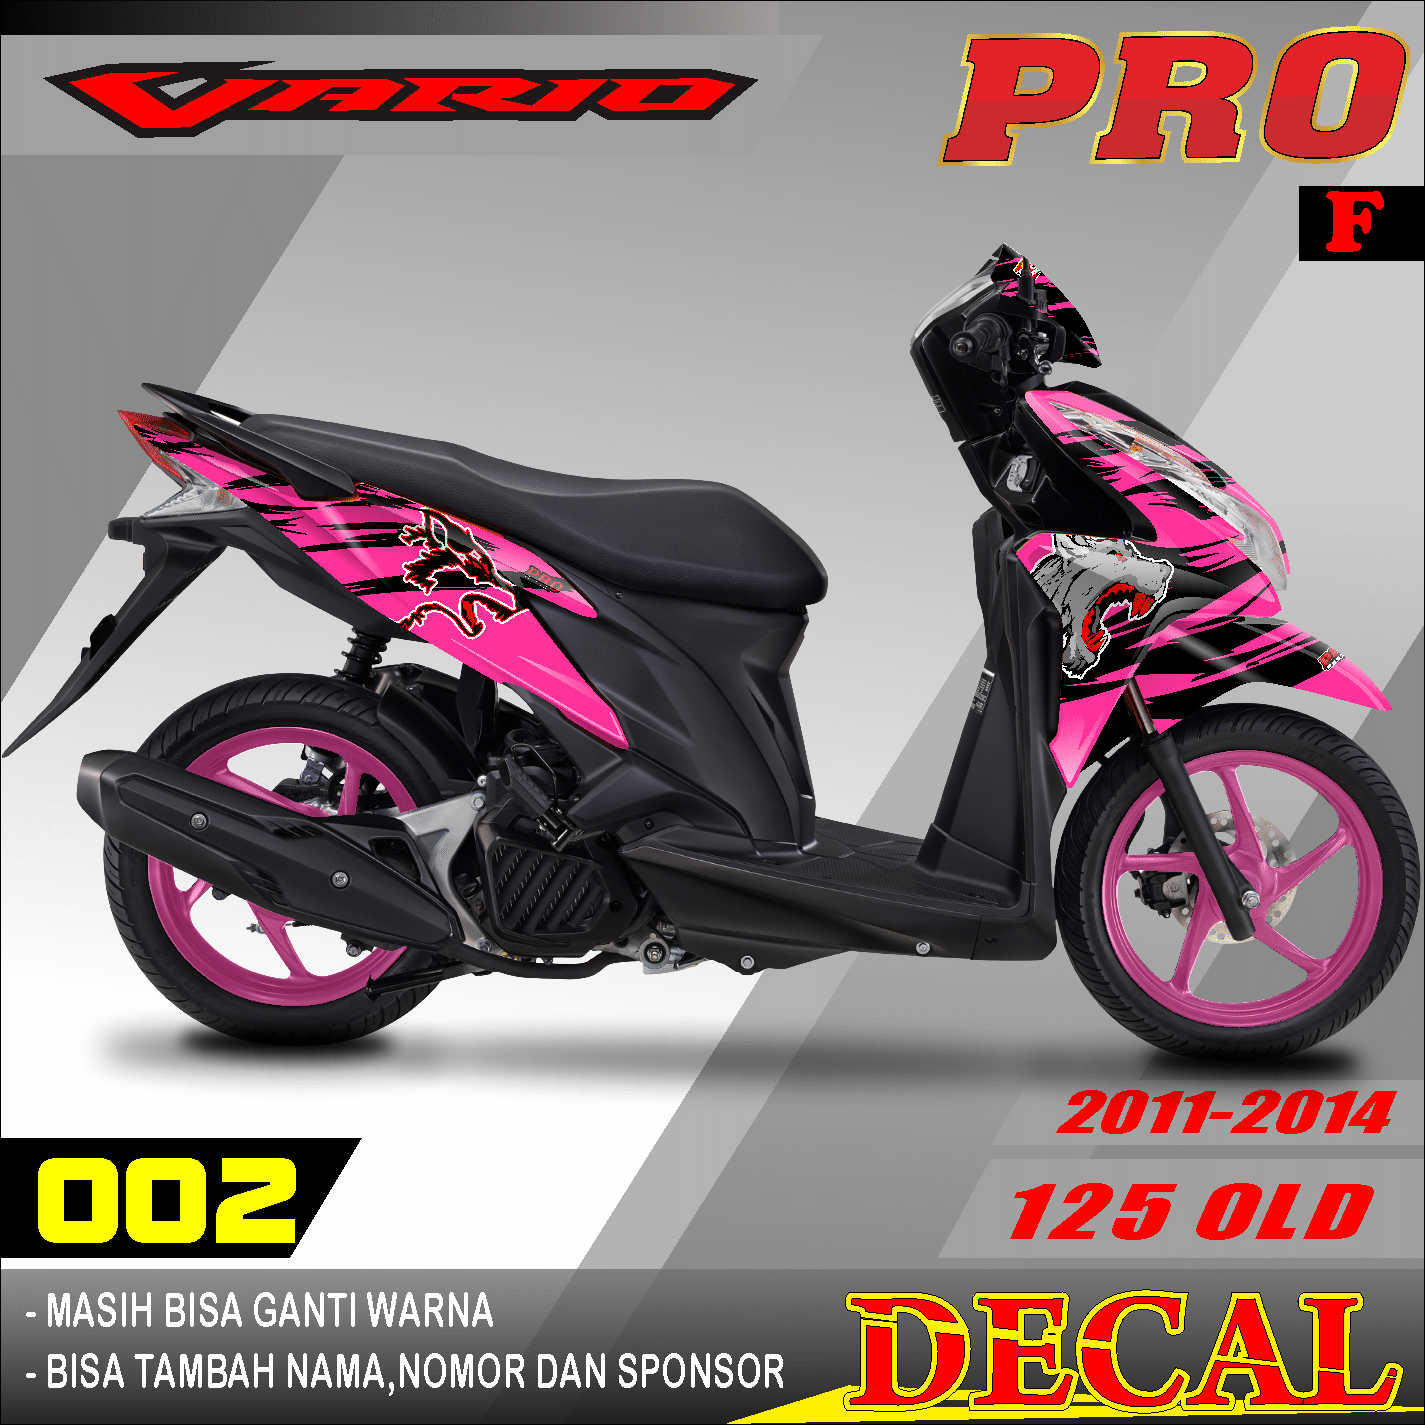 Decal Stiker Vario 125 Old Full Body Decal Vario Decal Variasi Vario Decal Sticker Vario 125 Old 002 Murah Lazada Indonesia